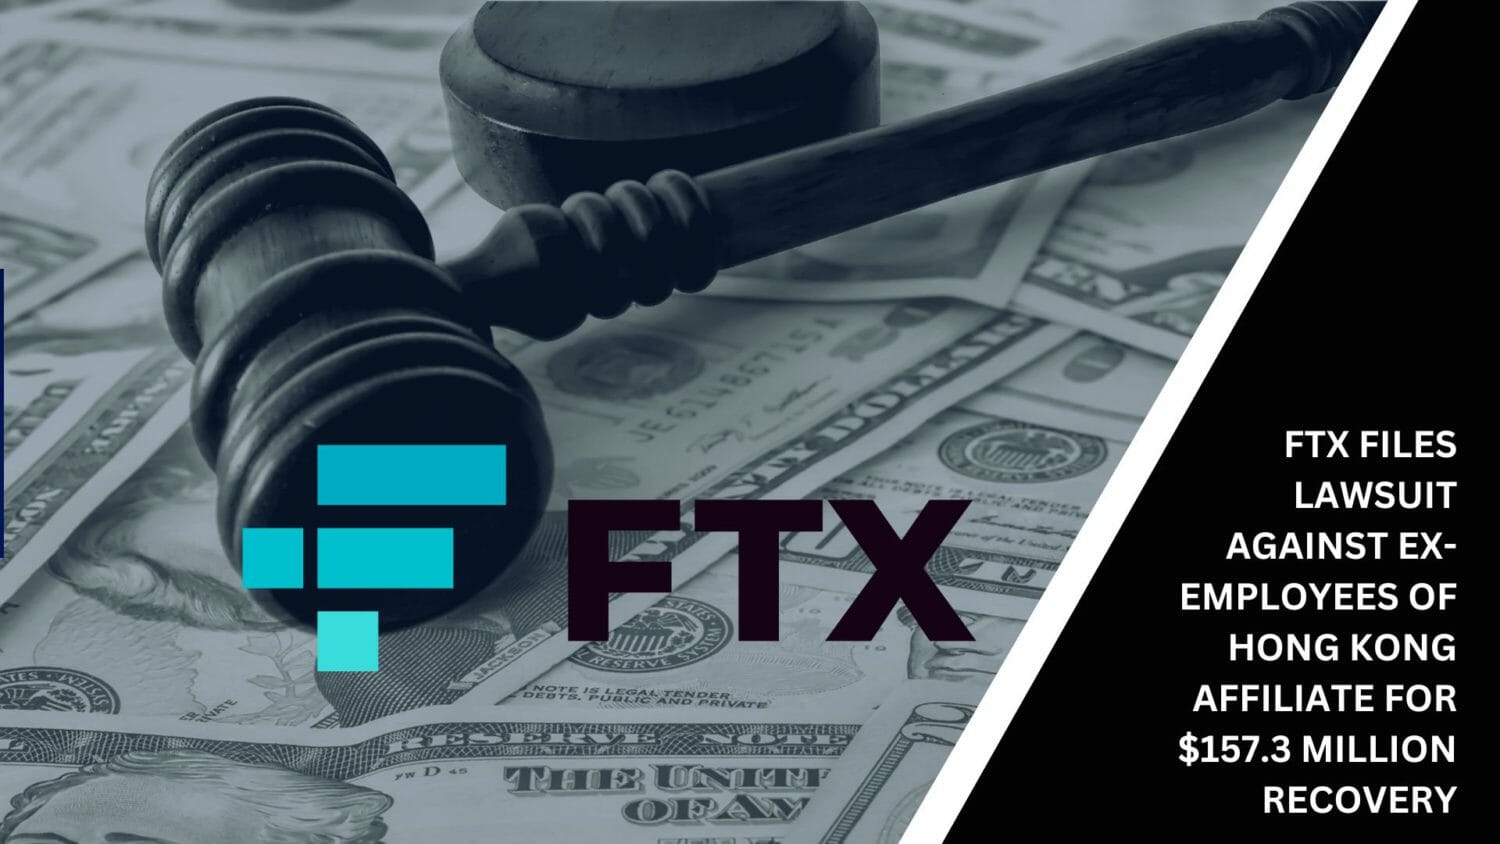 Ftx Sues Hong Kong Affiliate'S Ex-Employees For $157.3 Million Recovery